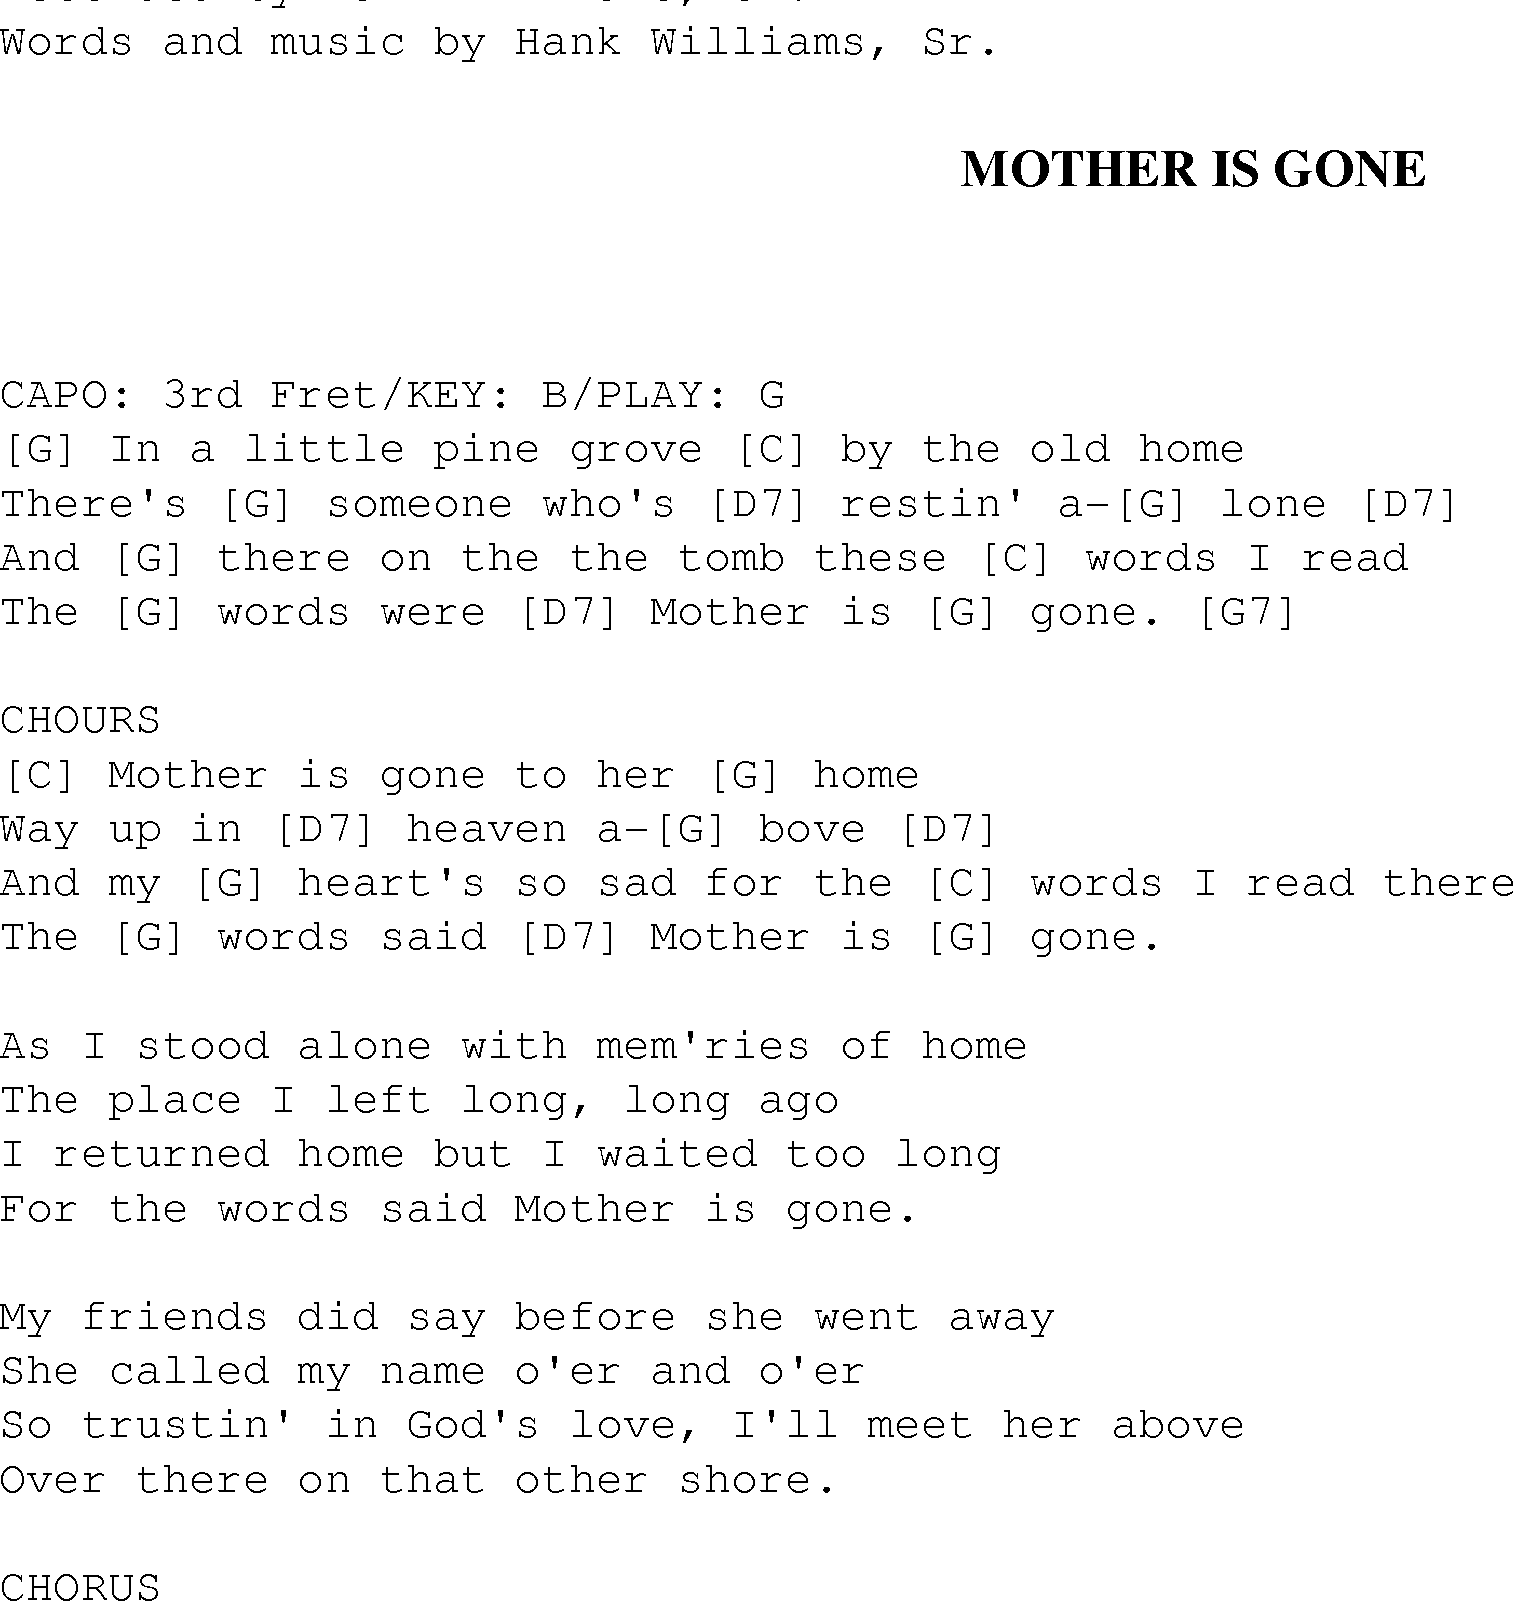 Gospel Song: mother_is_gone, lyrics and chords.